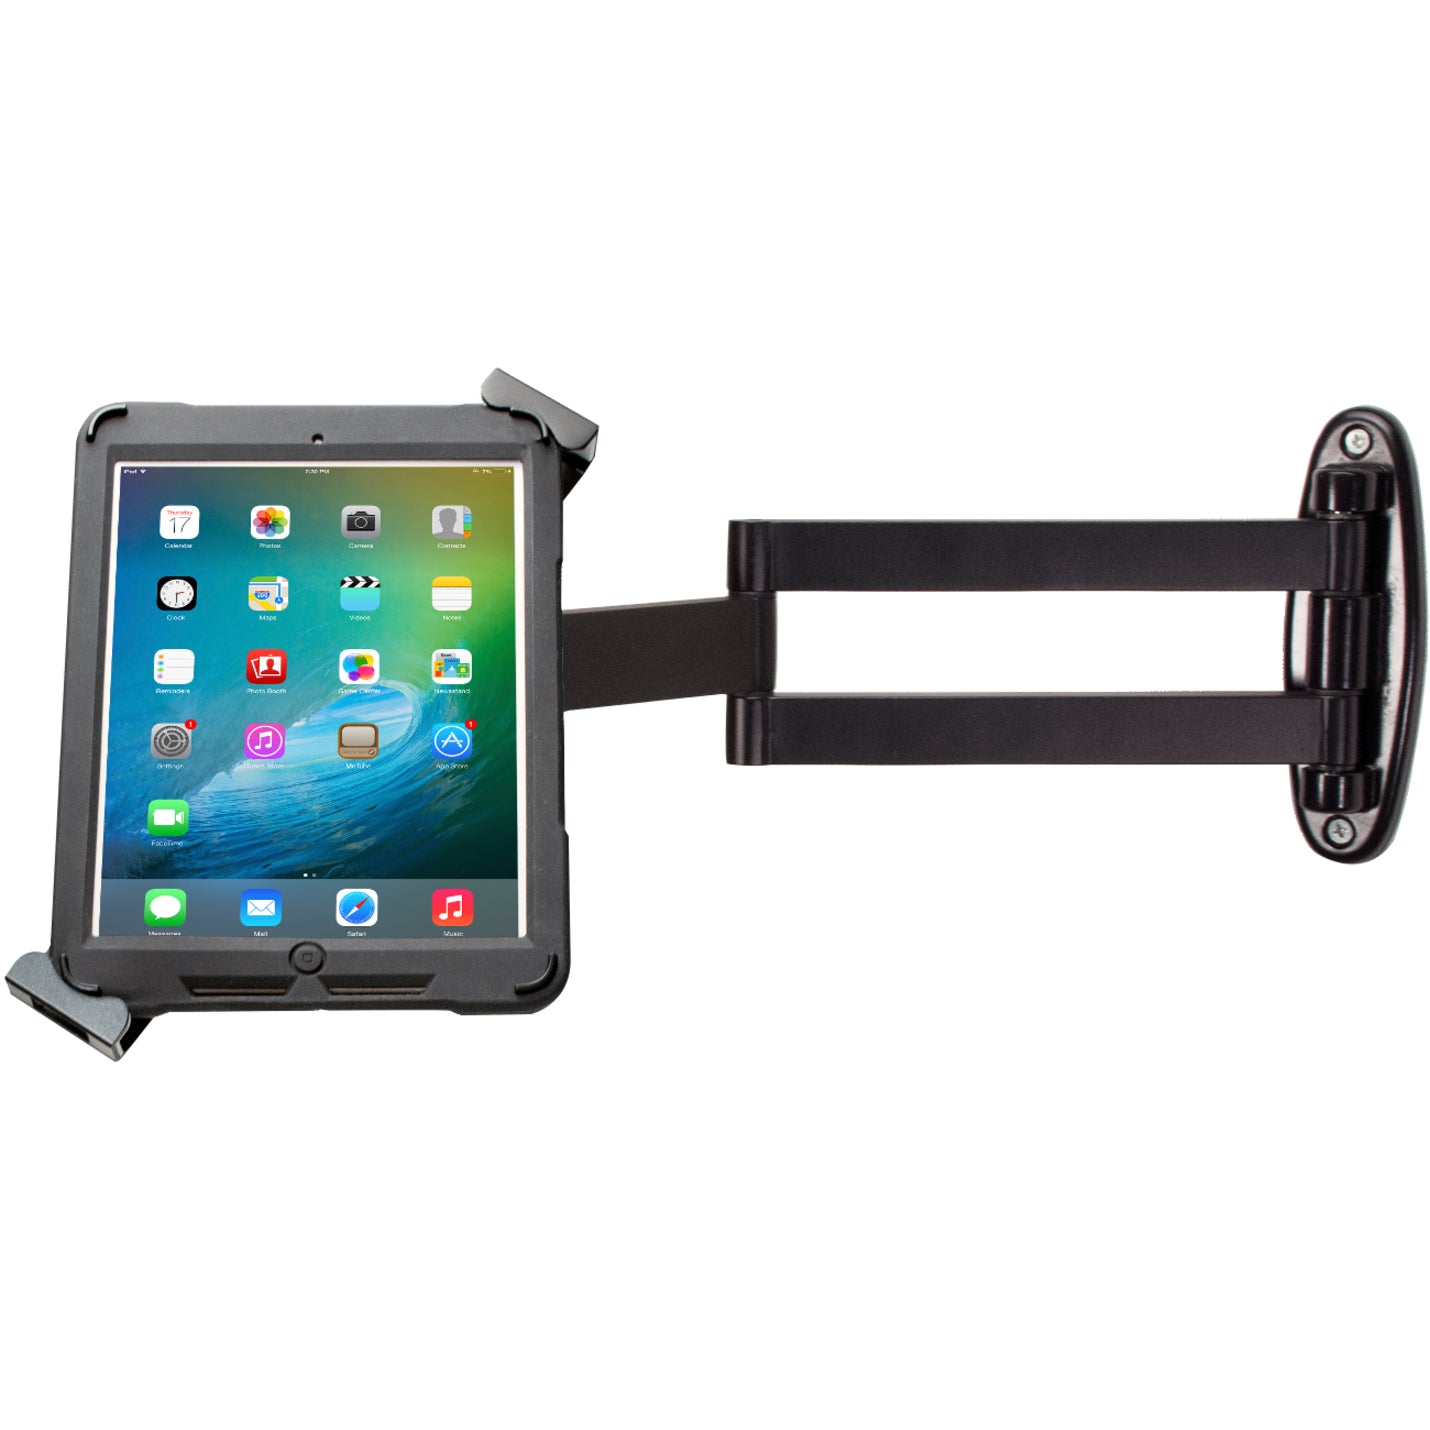 CTA Digital PAD-ASWM Articulating Security Wall Mount for 7-13 Inch Tablets, Compatible with iPad, Surface Pro, Galaxy Tab, and More